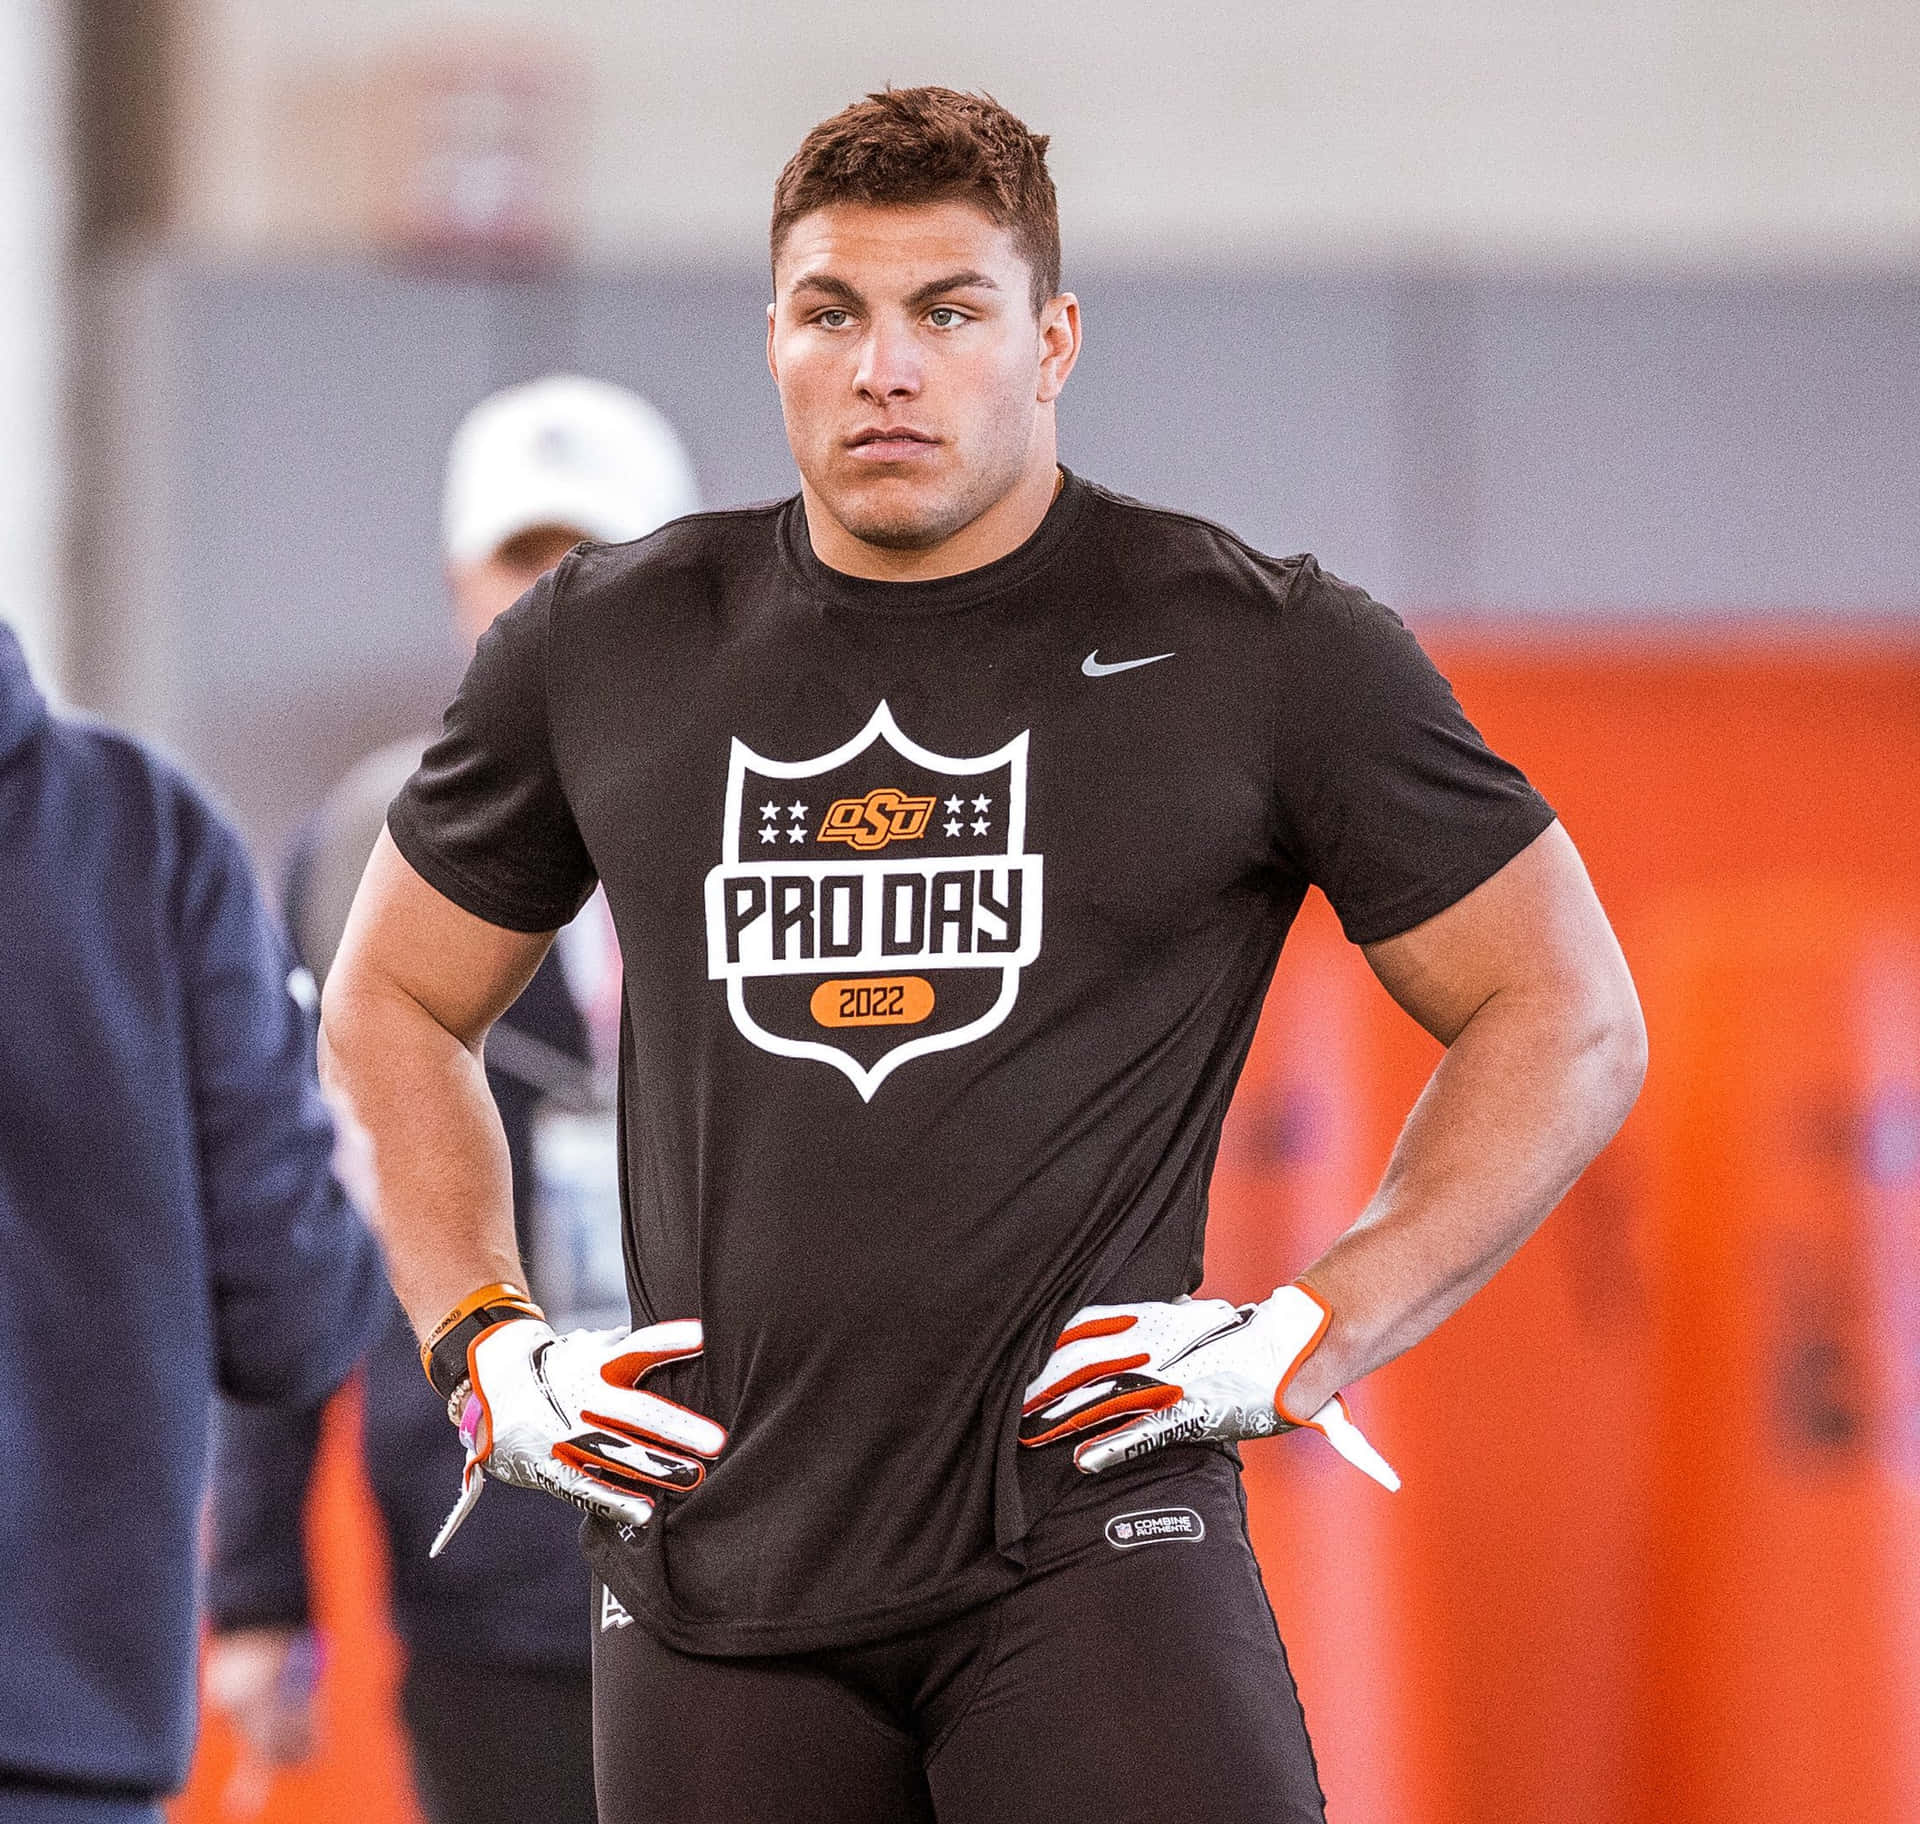 Football Player Pro Day2022 Wallpaper